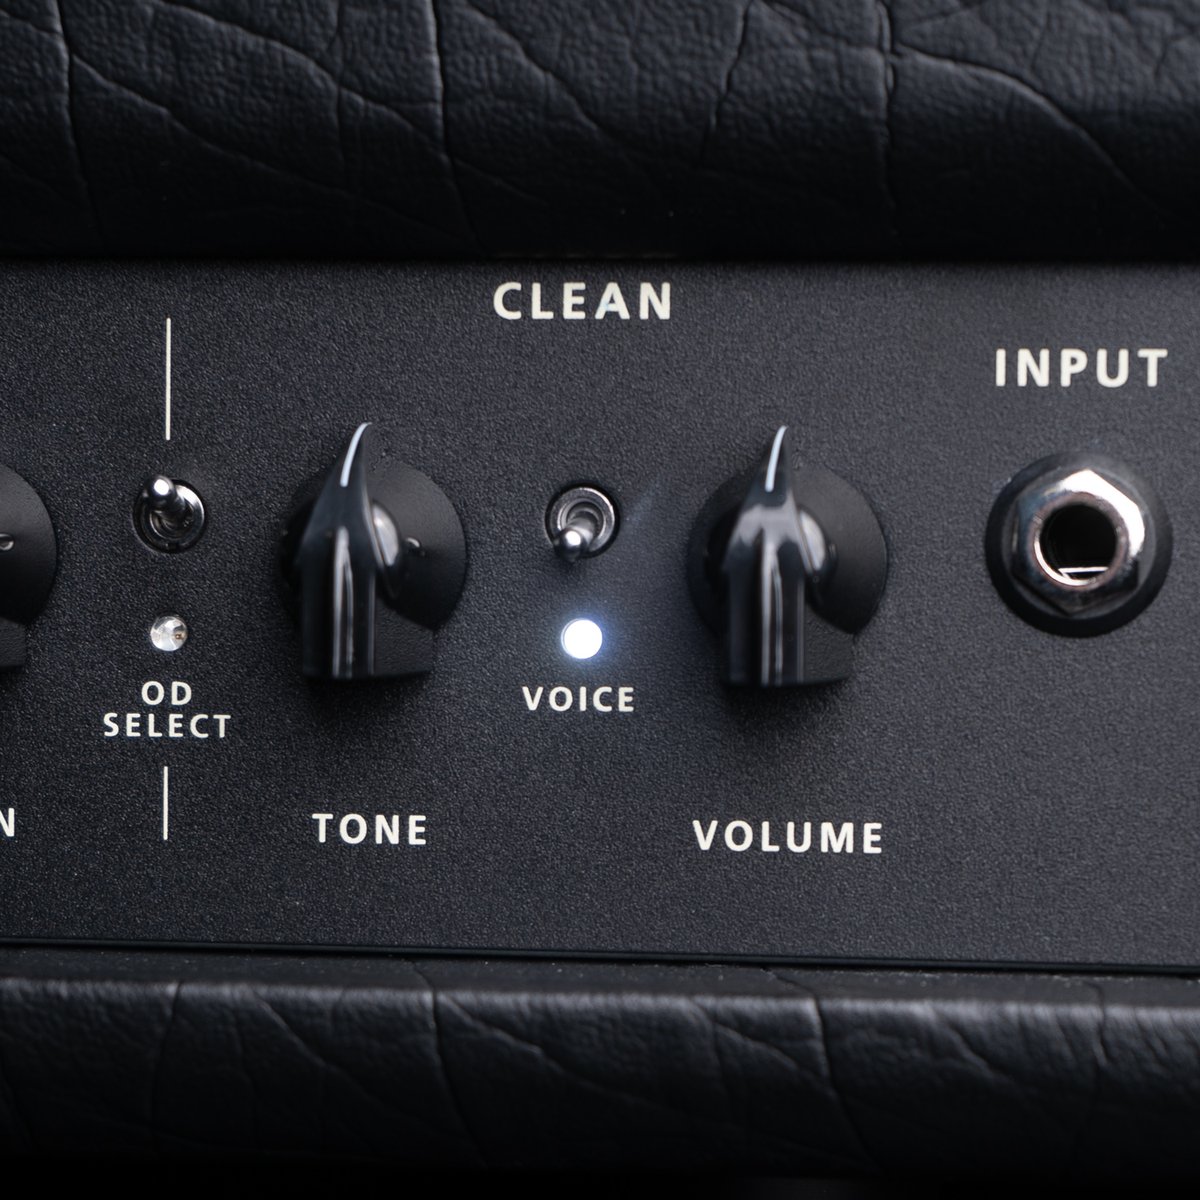 Choose between two incredible voicings on the HT MK III Clean channel: a bright and pristine American voice with a solid and tight bass response, and a classic British voice with a looser bass response and a warmer mid-range. Learn more: blackstaramps.com/ht-series-mkii…